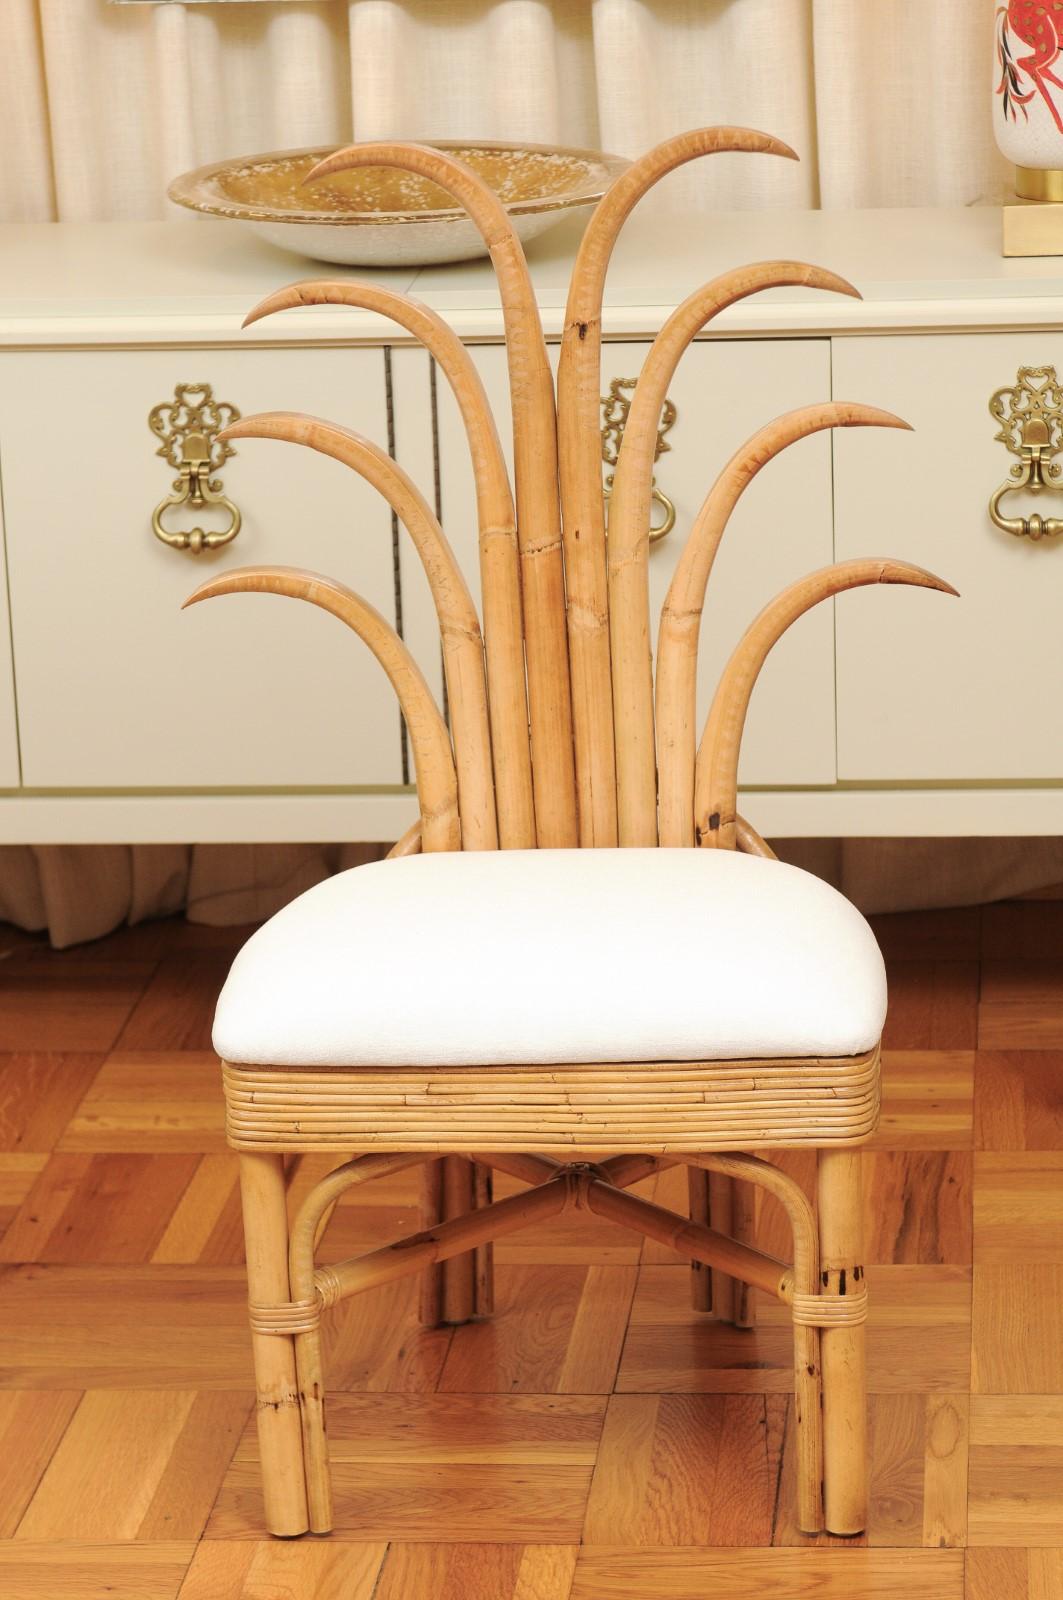 Exquisite Set of 8 Rattan and Cane Palm Frond Dining Chairs, circa 1950 For Sale 11